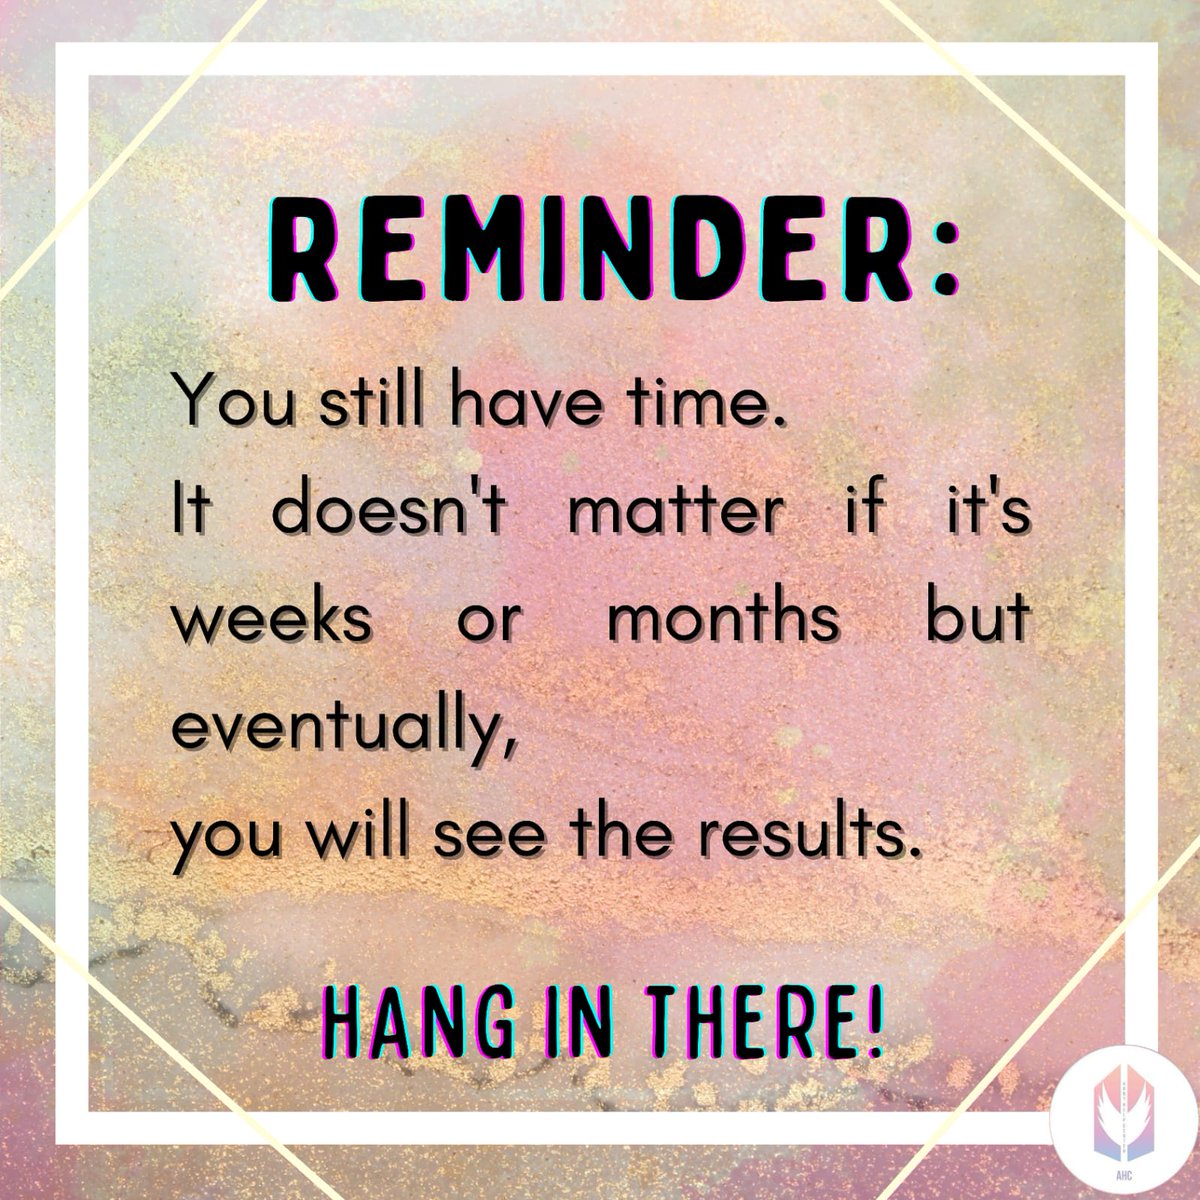 Hang in there 💜 #PositivitywithAHC @BTS_twt